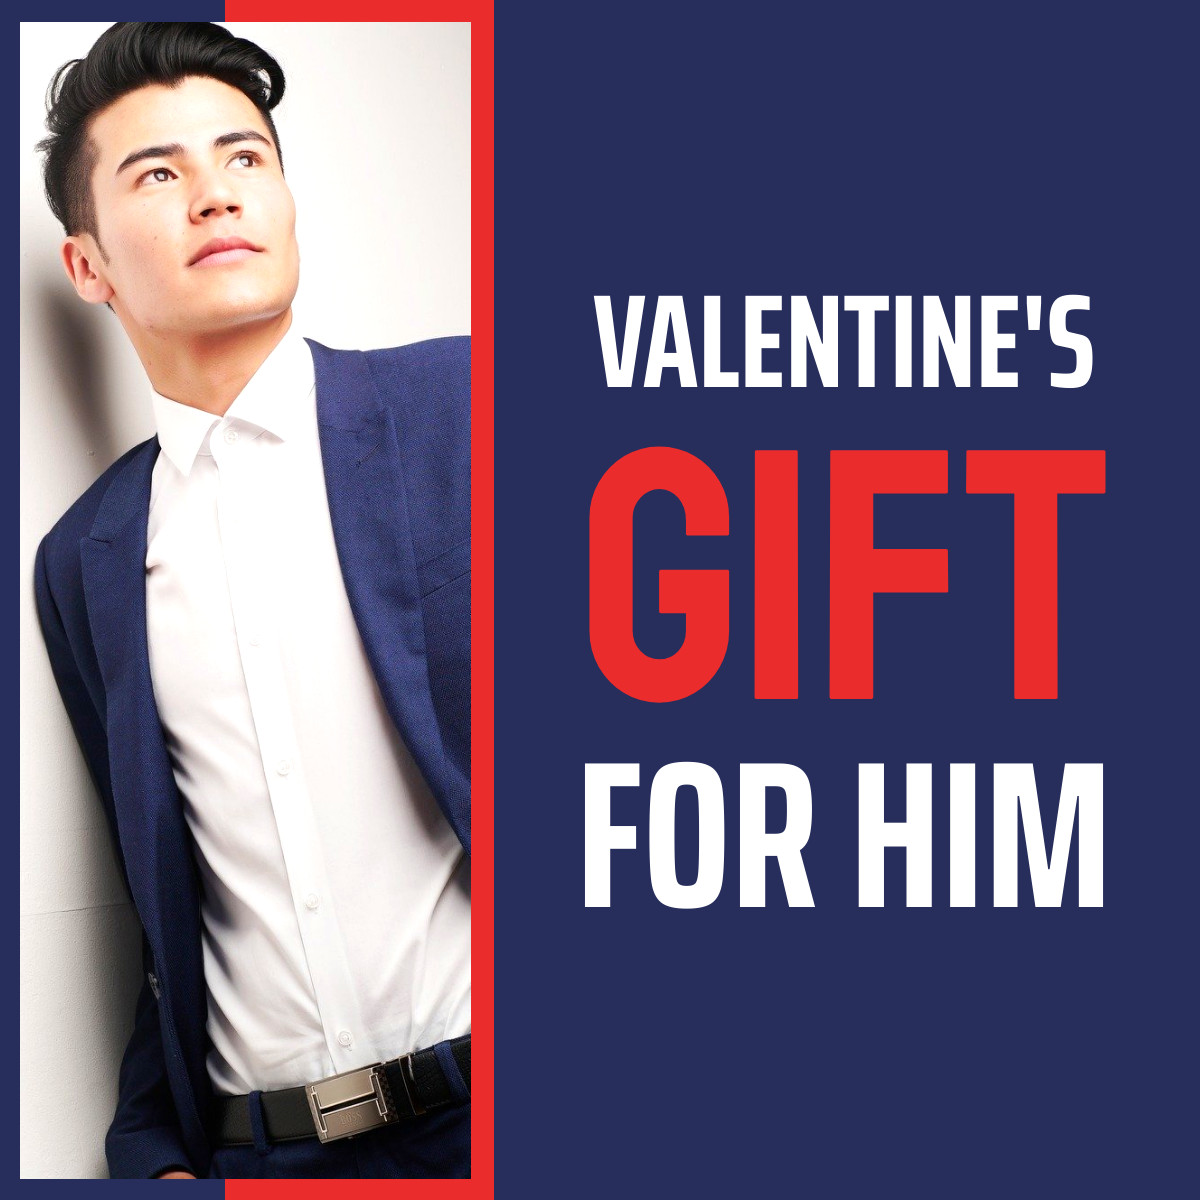 Valentine's Day Gift for Him Inline Rectangle 300x250